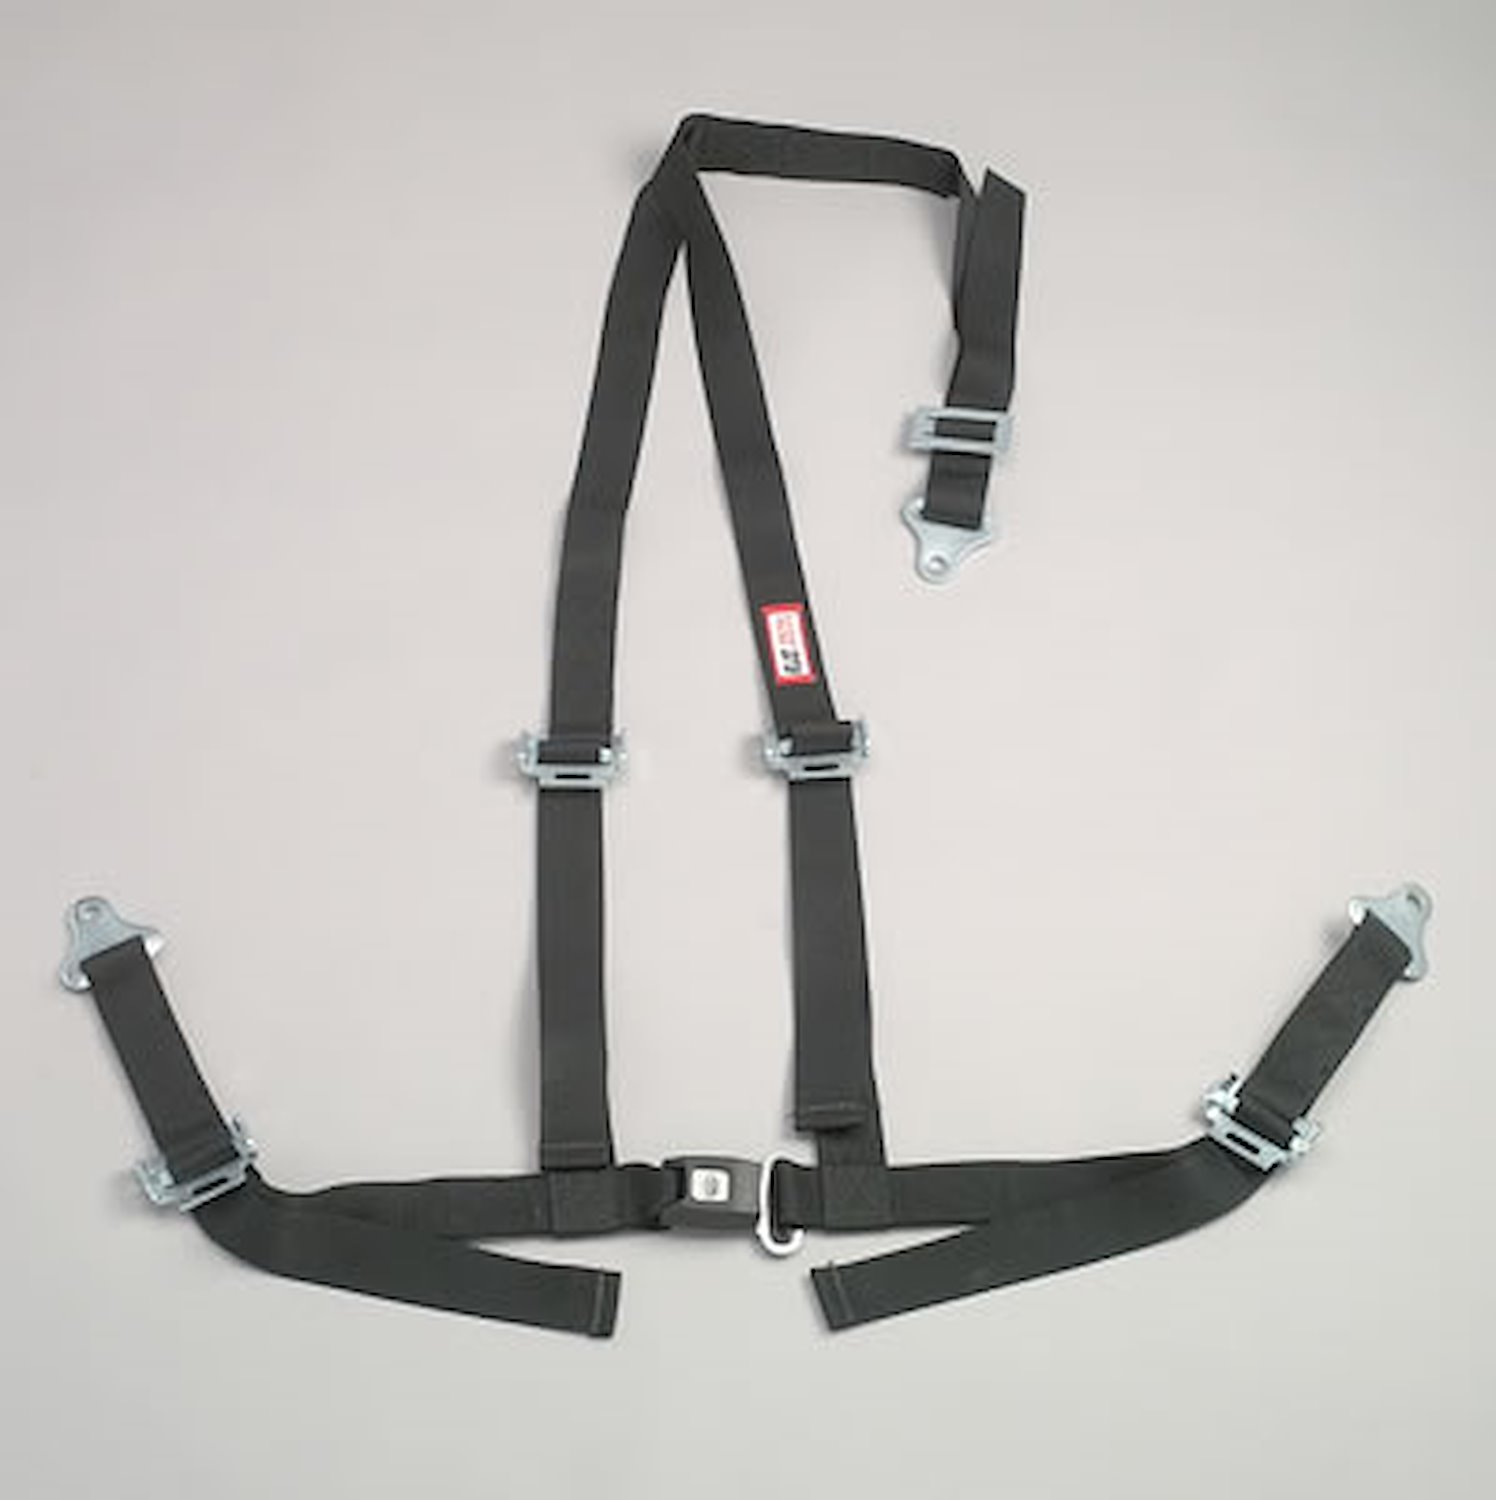 NON-SFI B&T HARNESS 2 PULL UP Lap Belt SNAP 2 S. H. Individual ROLL BAR Mount WRAP/SNAP GRAY